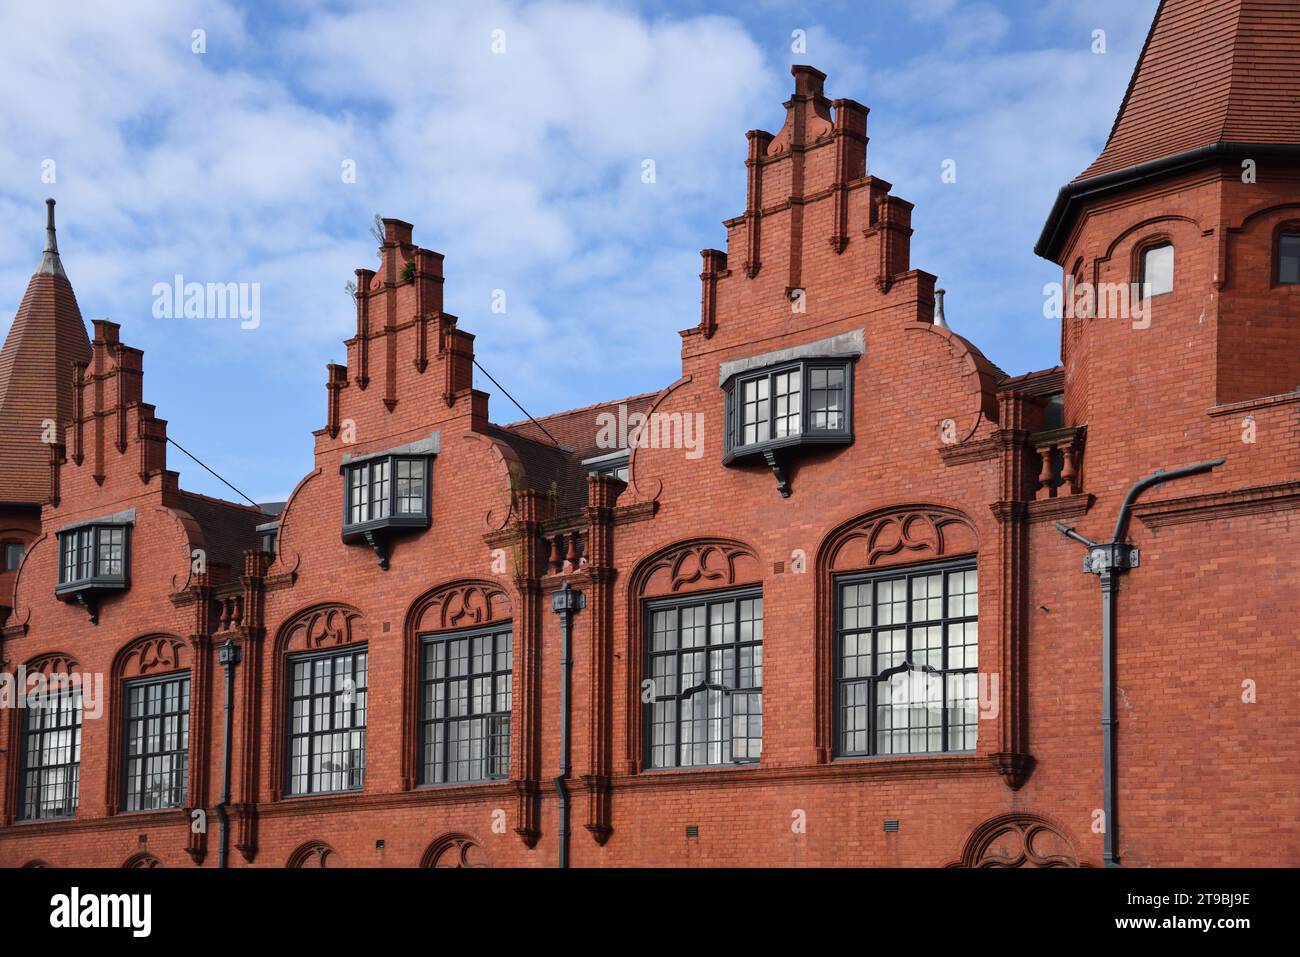 Decorative Flemish Gothic Style Red Brick Gables on Victorian Chancery House (1899) Grade II Listed Building, Paradise Street, Liverpool England UK Stock Photo